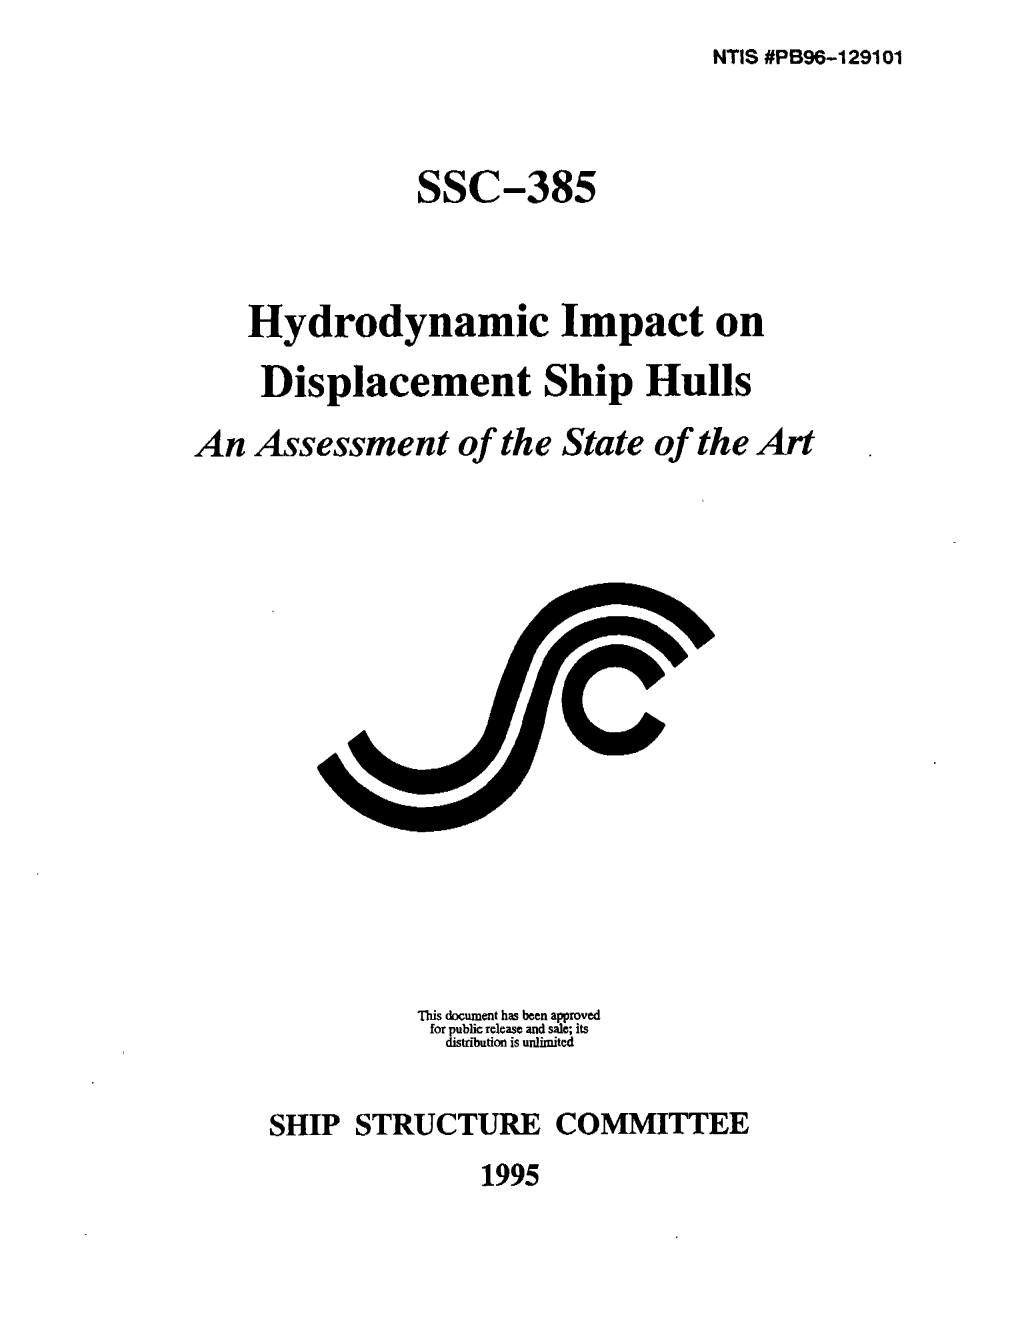 SSC-385 Hydrodynamic Impact on Displacement Ship Hulls -An Assessment of the State of the Art J